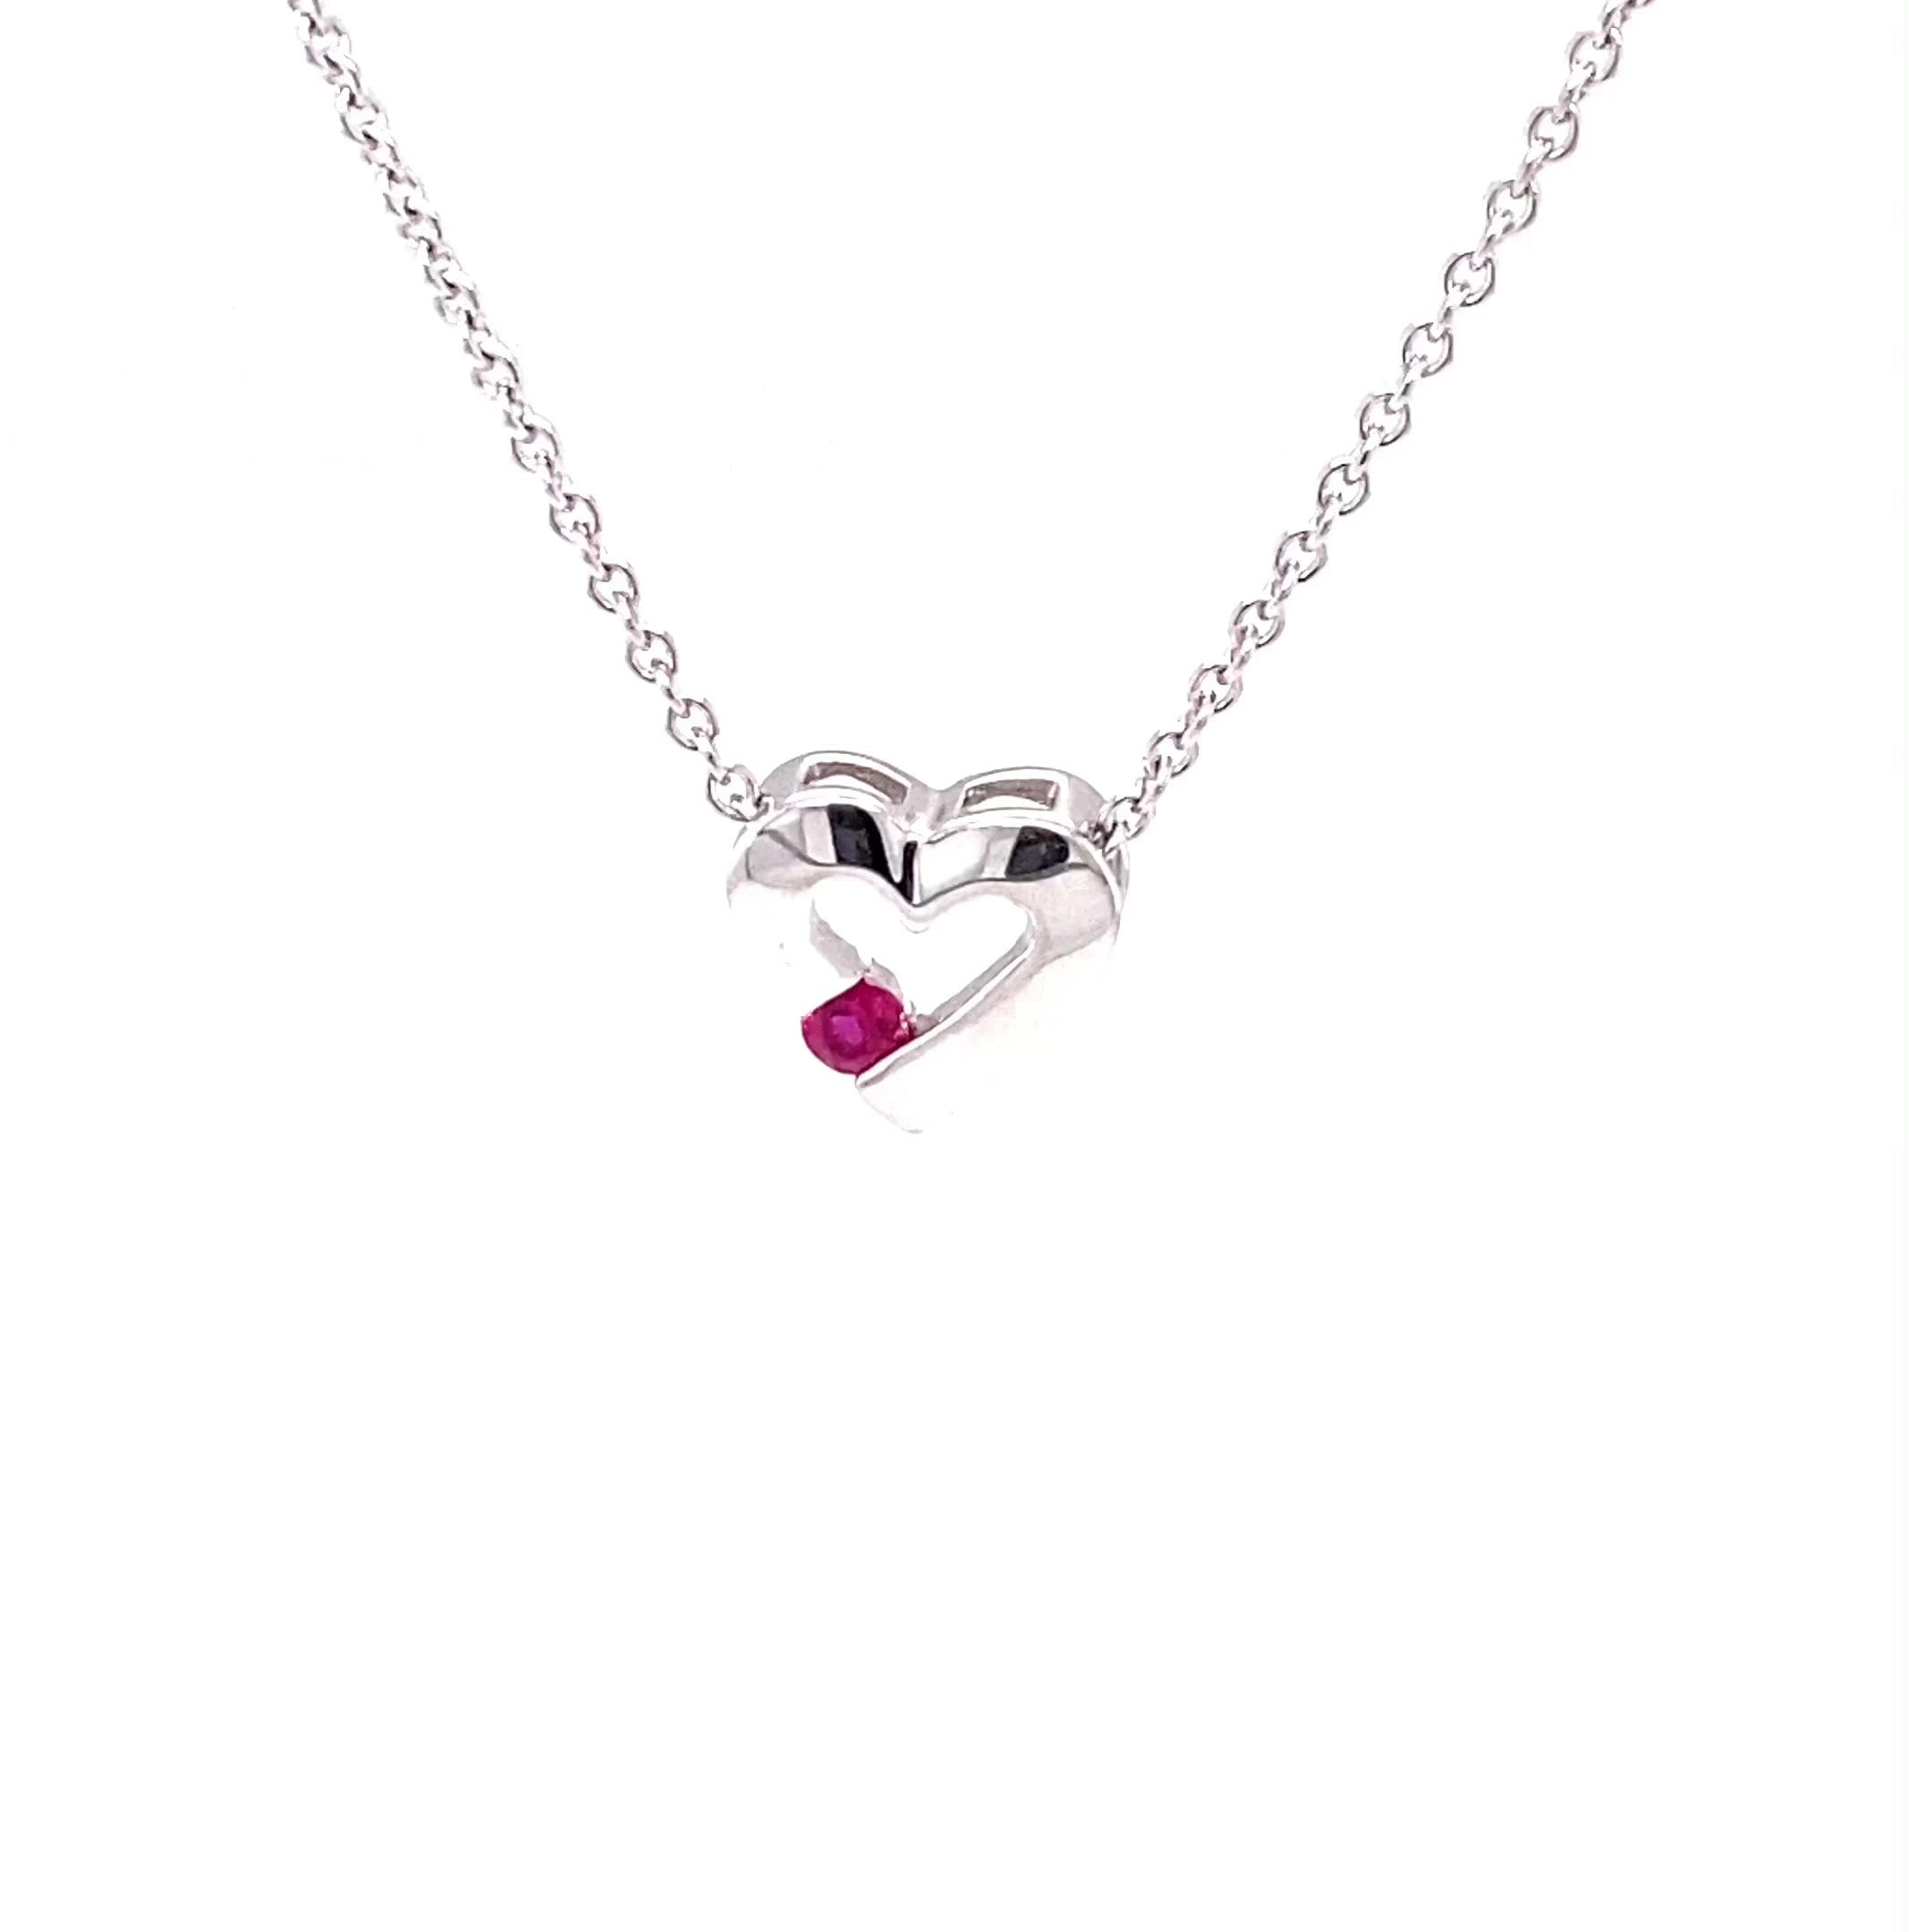 Natural Ruby Necklace 14K Solid White Gold .17ct Heart Necklace Pendant Necklace Birthstone Necklace Valentines Day Love Statement Jewelry